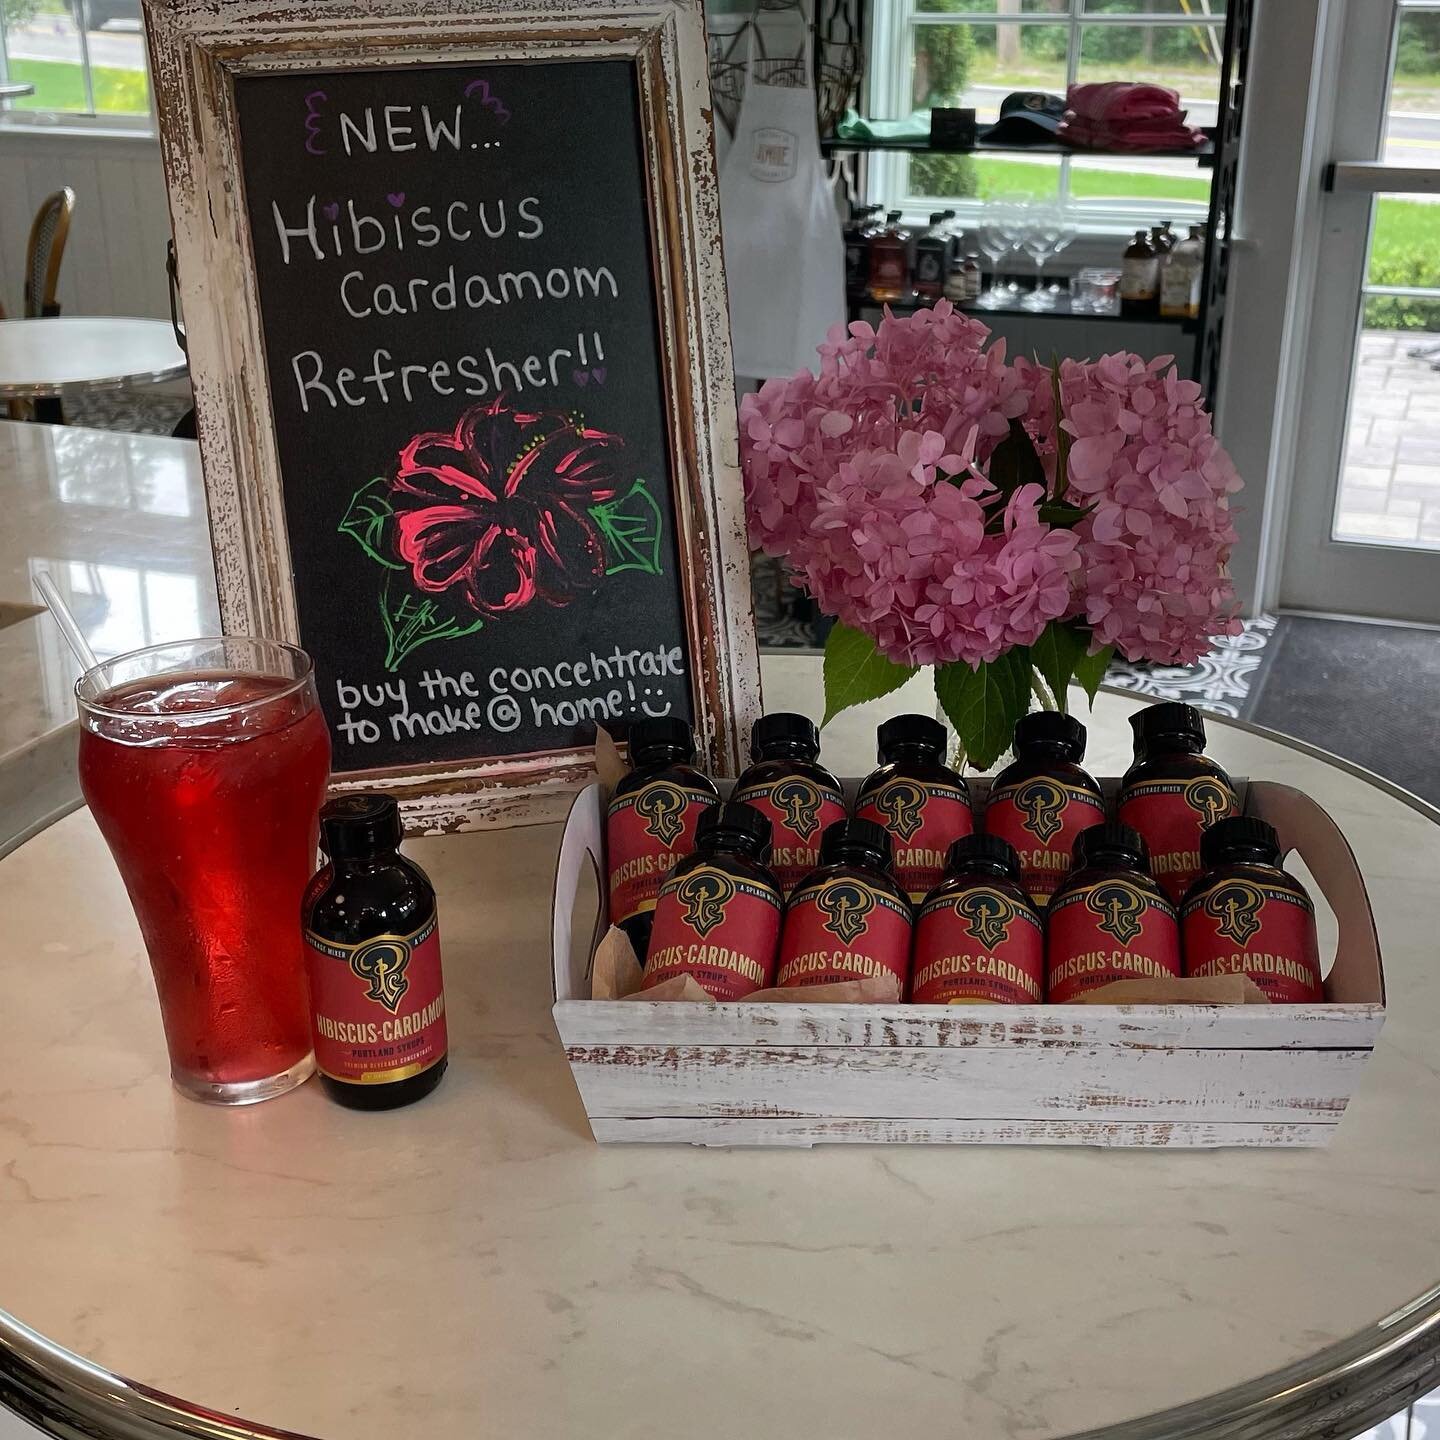 Try our new refreshing Hibiscus Cardamon soda. If you live it you can purchase your own bottle to make it at home. Great fir cocktails too! #drinks #portlandsyrups #soda #cocktailmixer #ostervillevillage #capecod #bestbakery